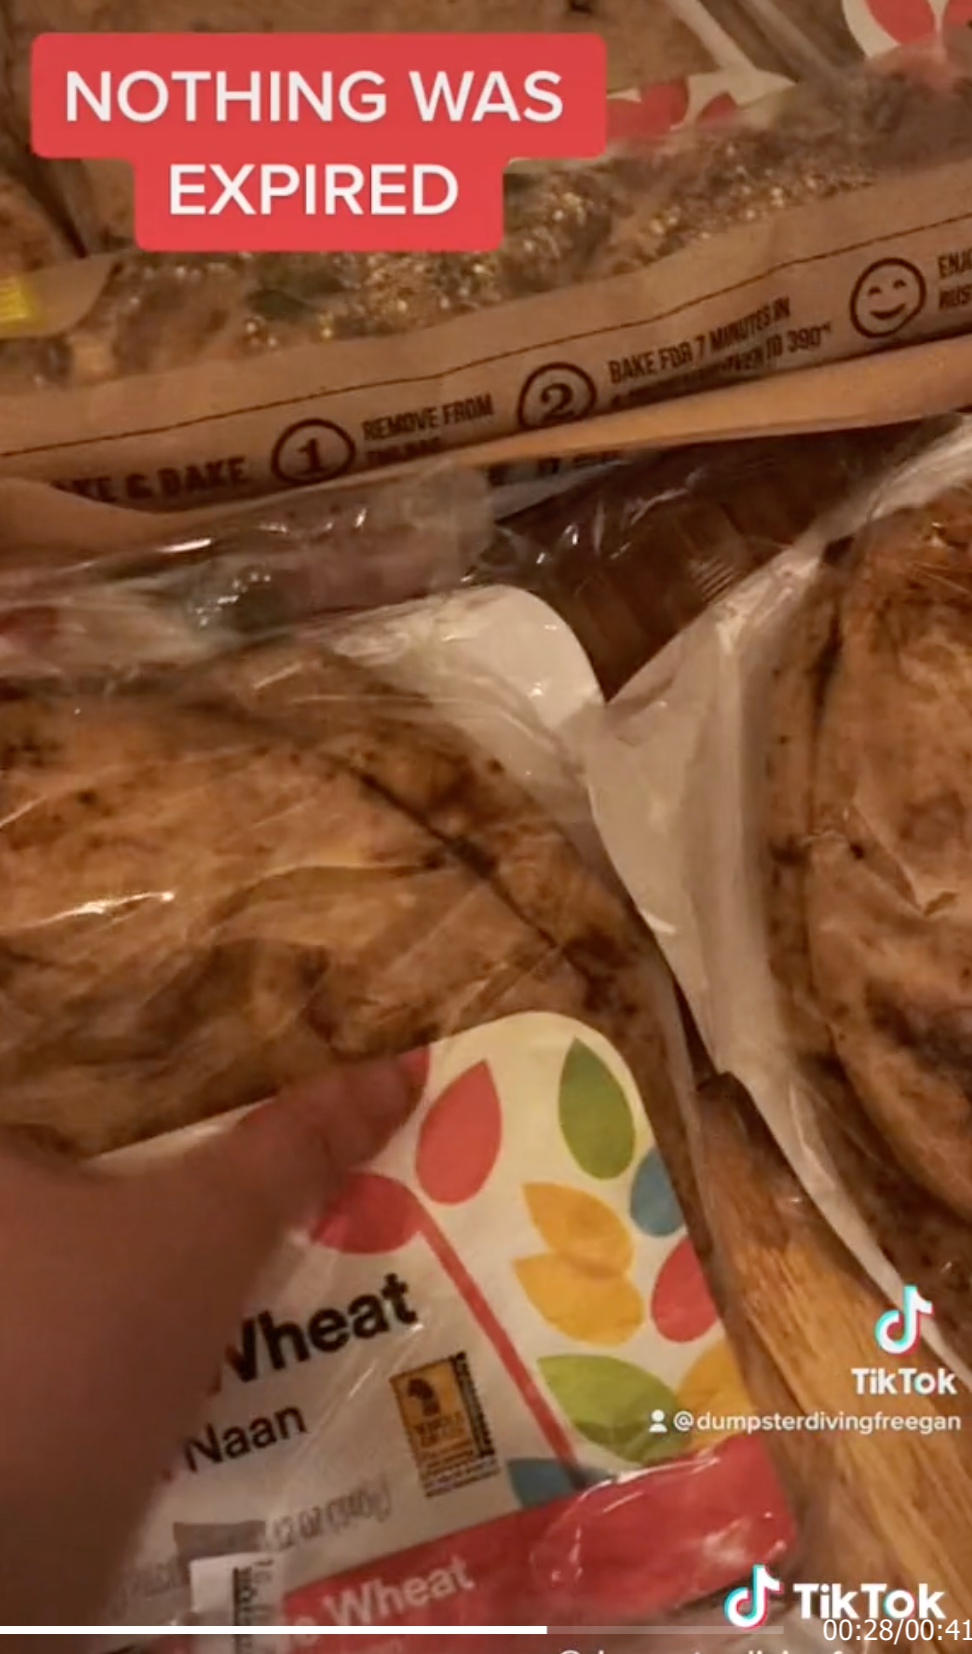 A TikTokker found a dozens of Whole Foods food packages that had not expired in a dumpster